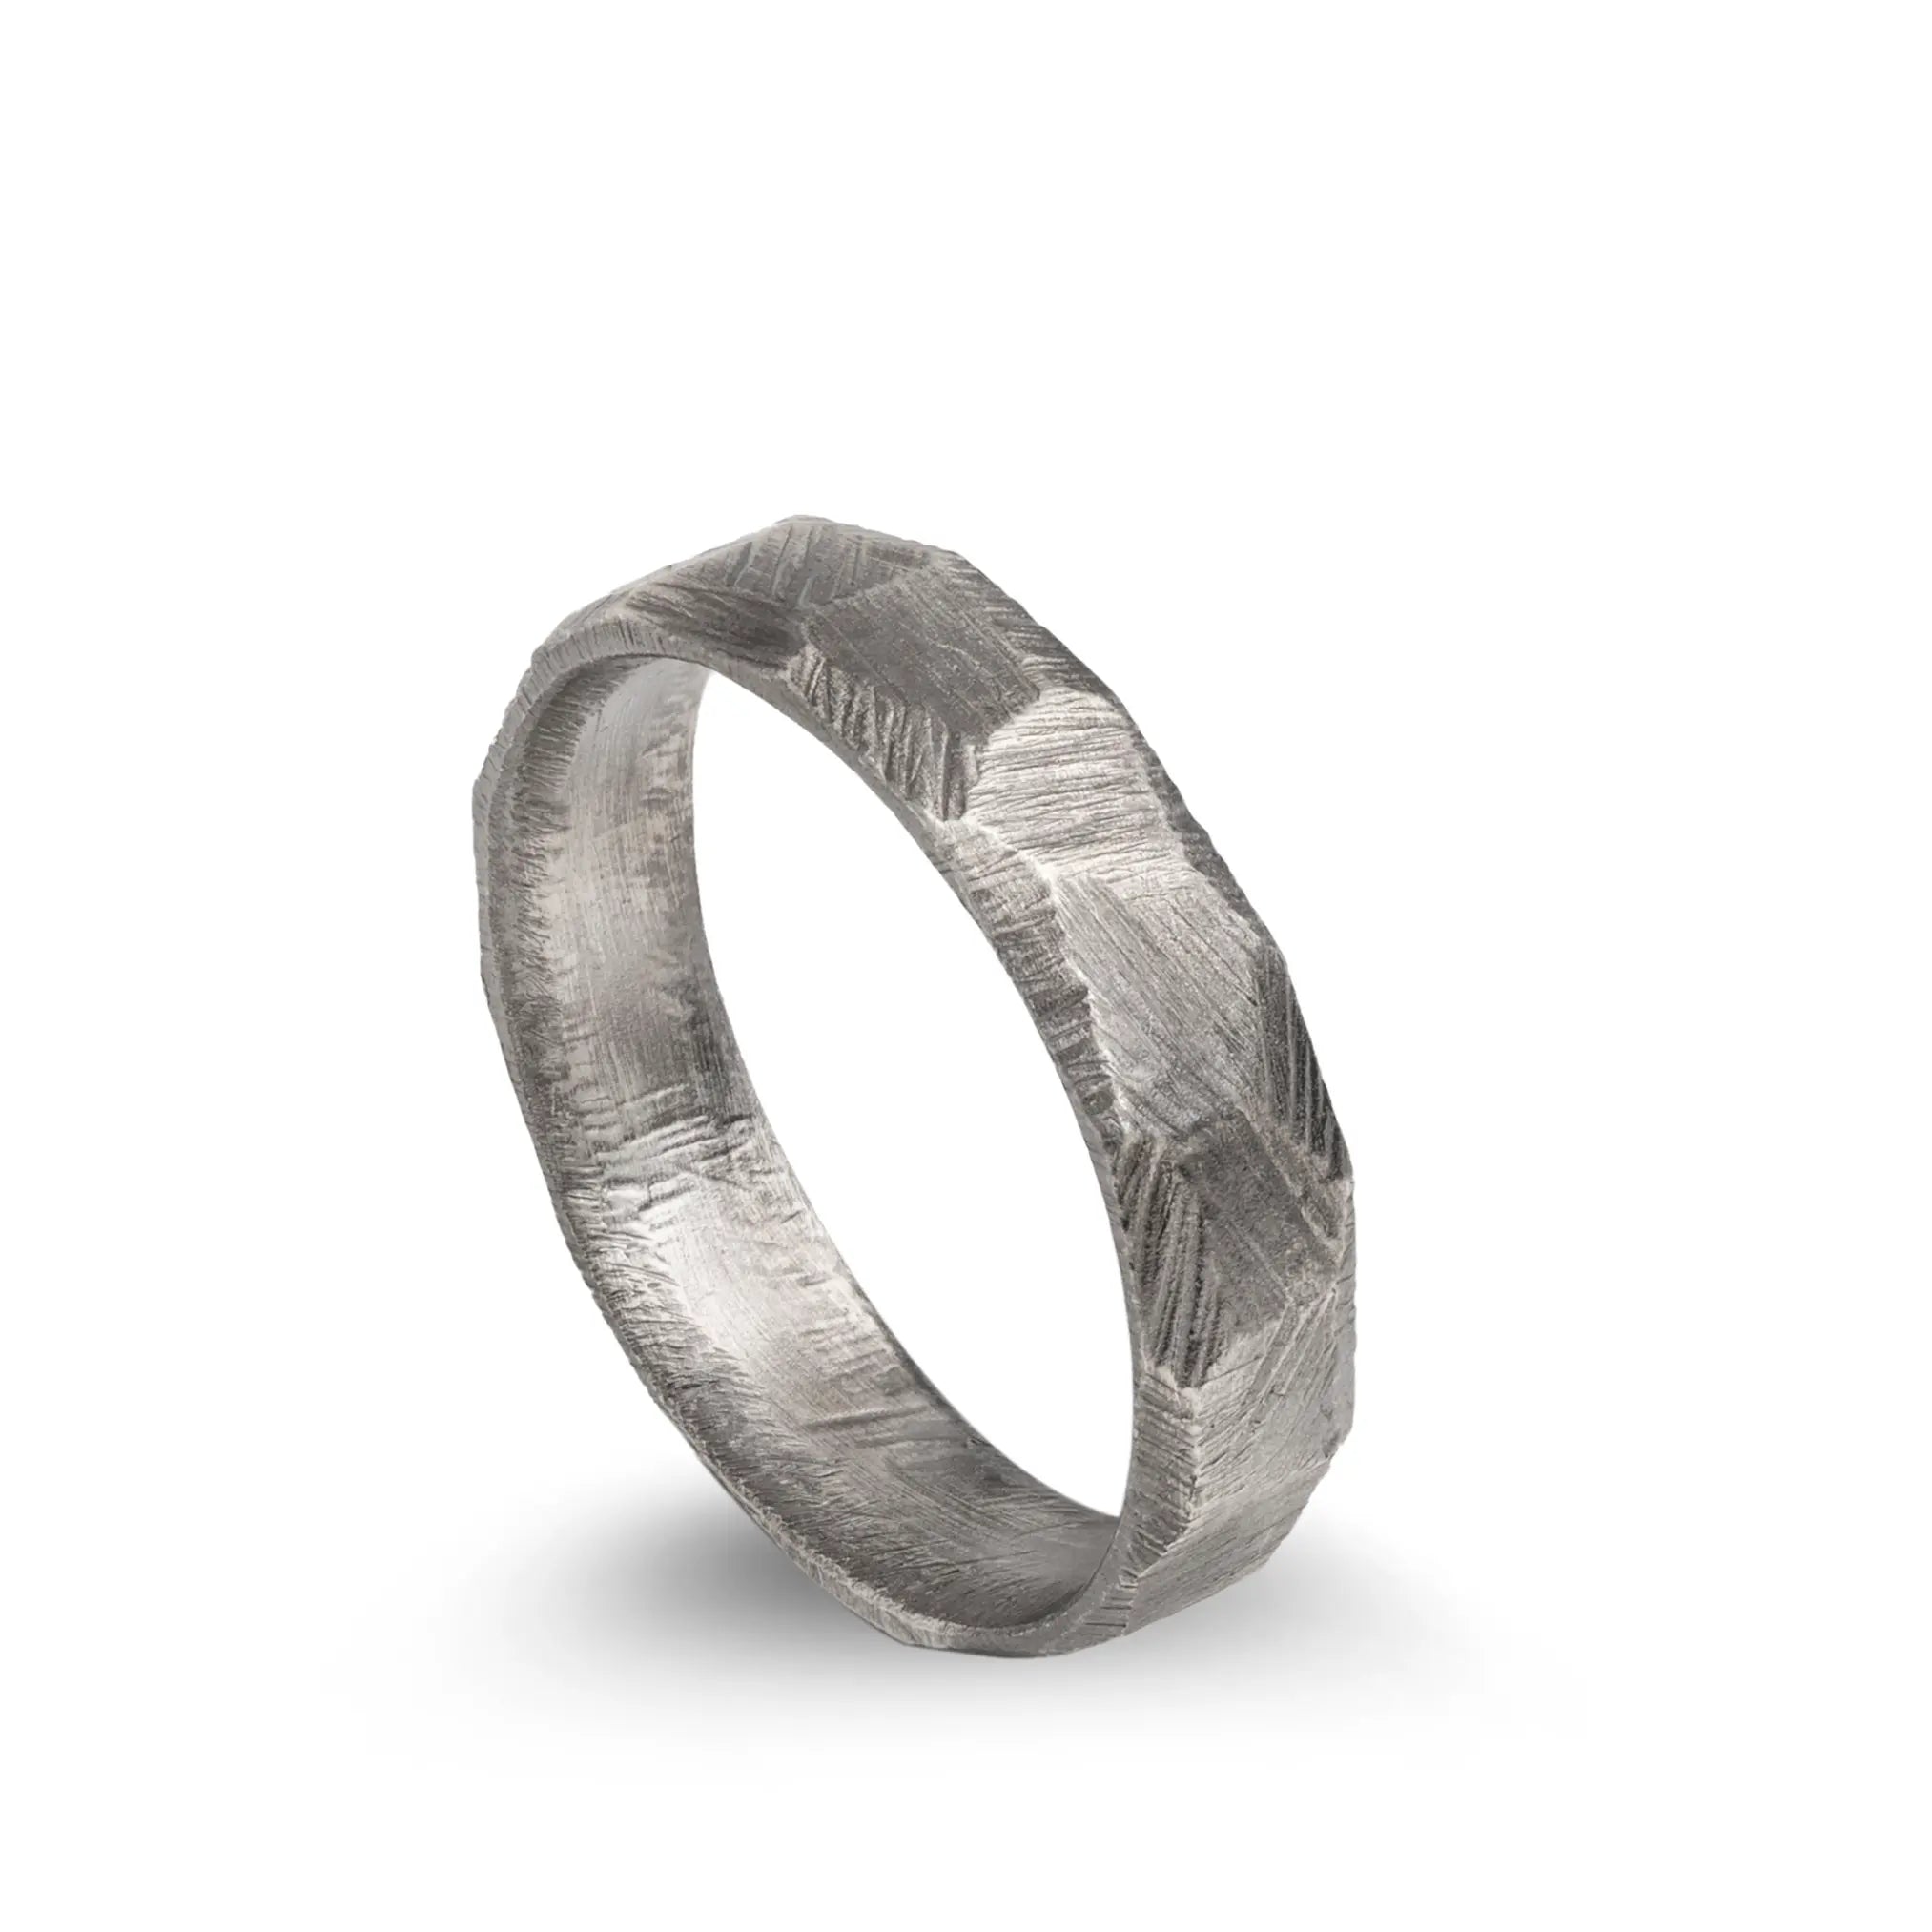 Faceted Band Ring Oxidized Silver 925